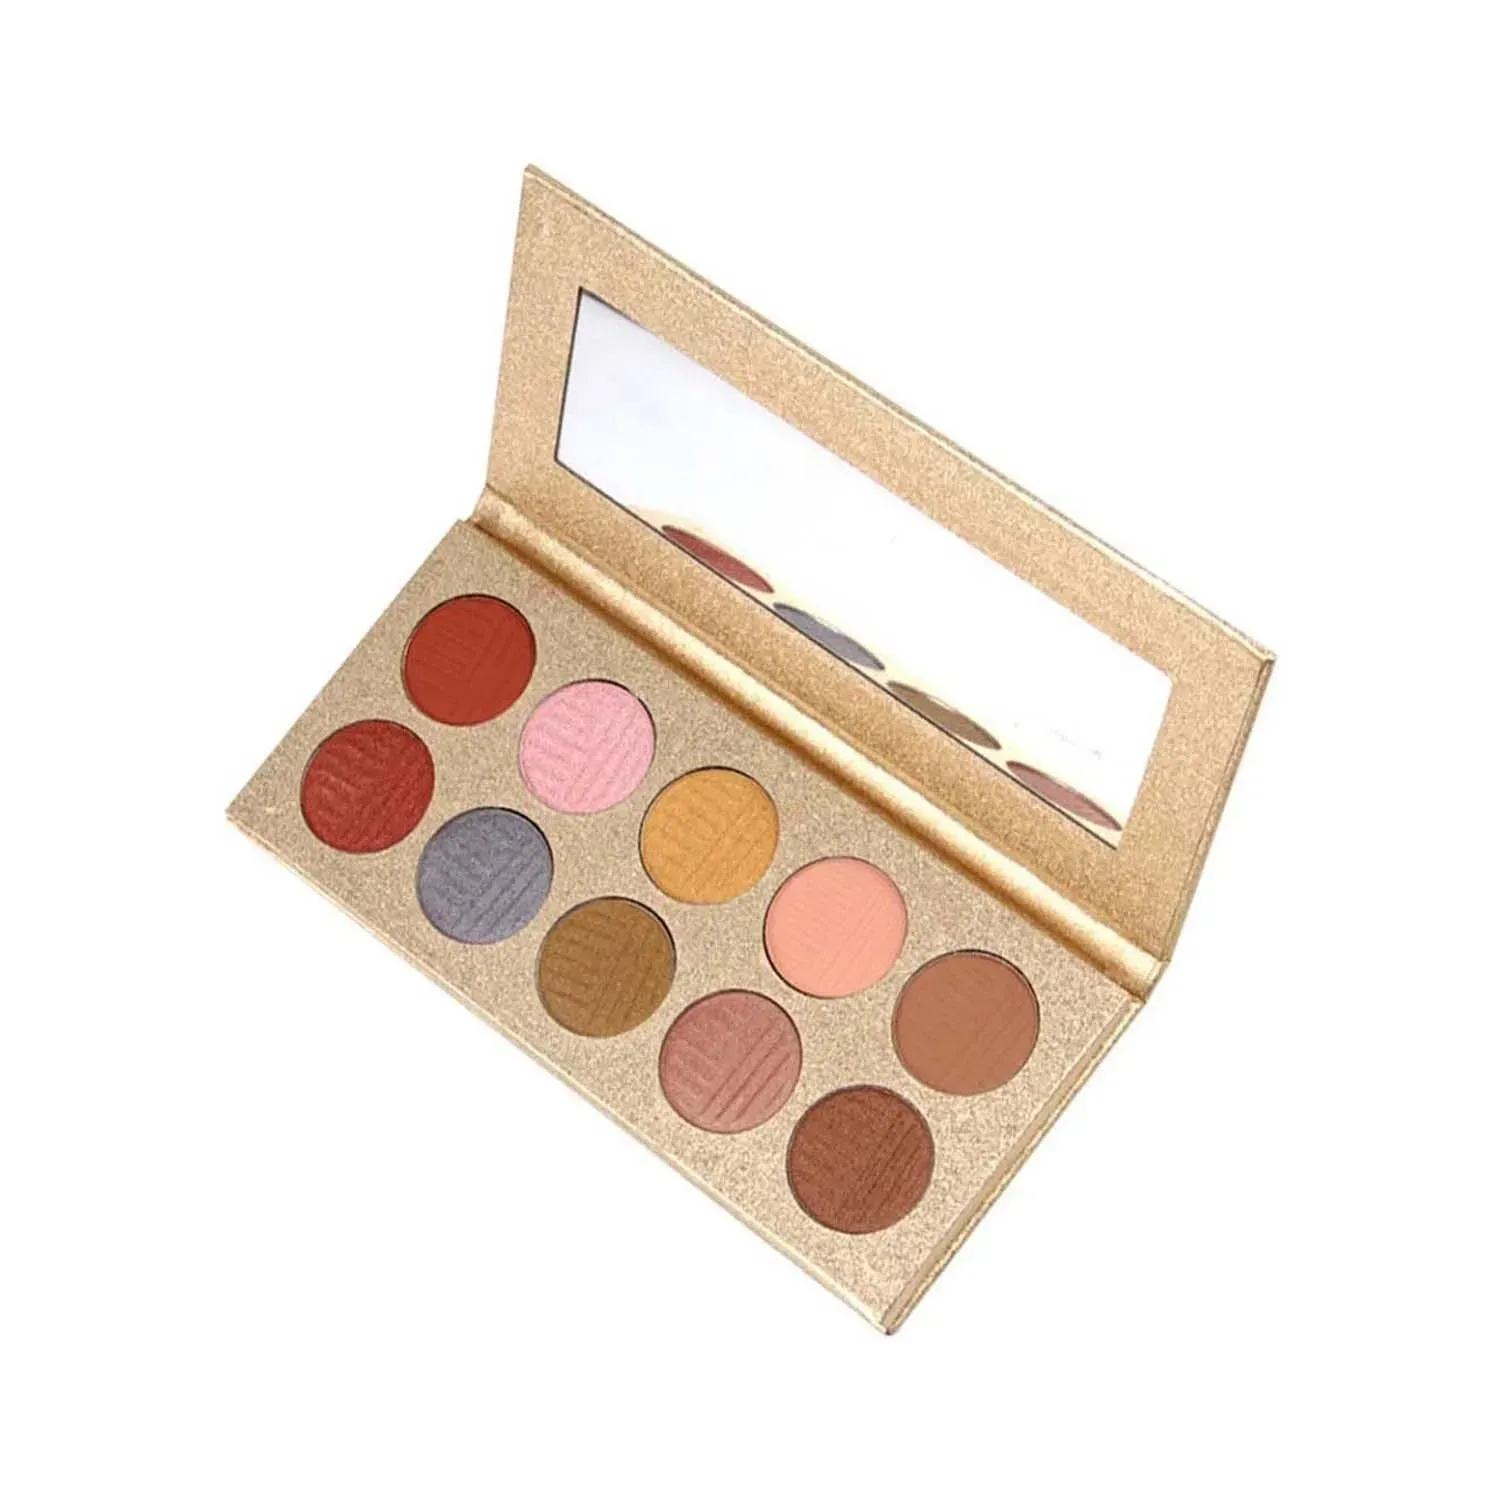 miss rose 12 color eyeshadow and 6 color glitter palette - m1 (28g)